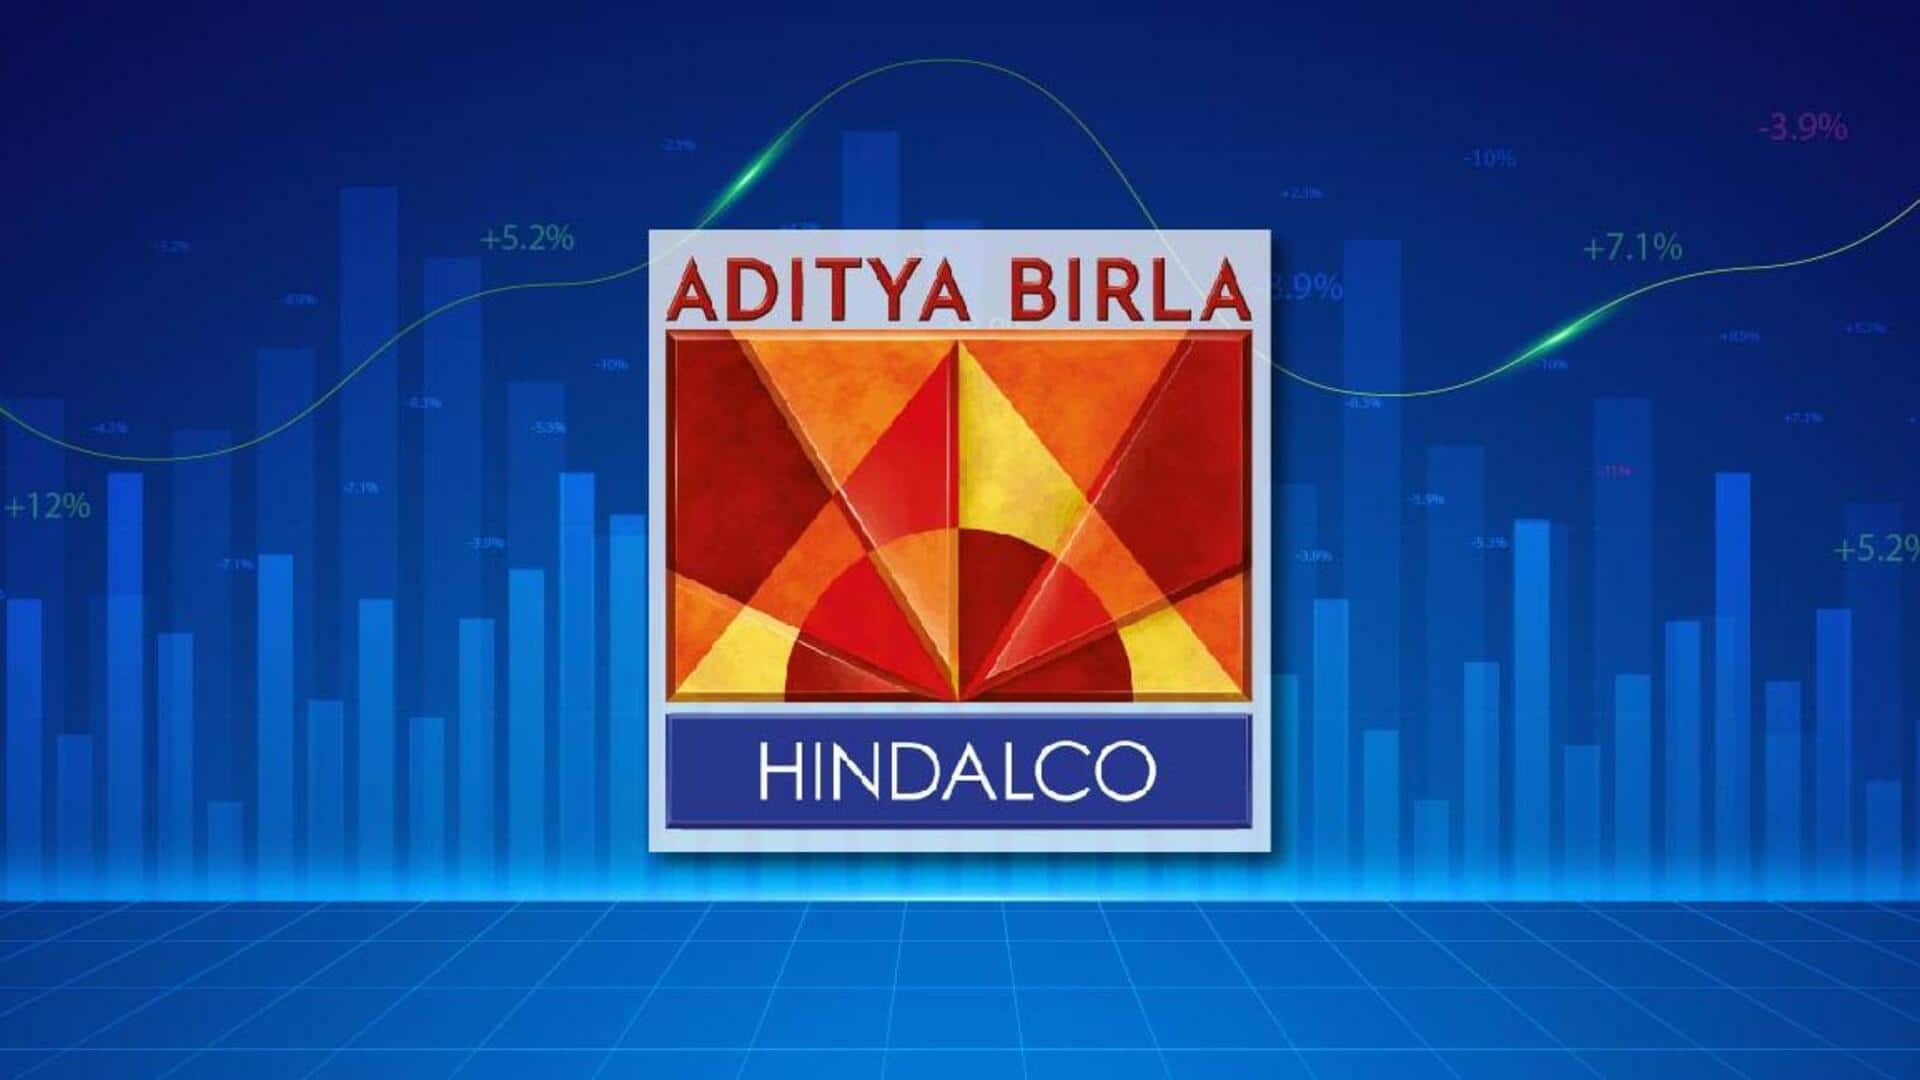 Hindalco's Q2 consolidated net profit flat at Rs. 2,196 crore